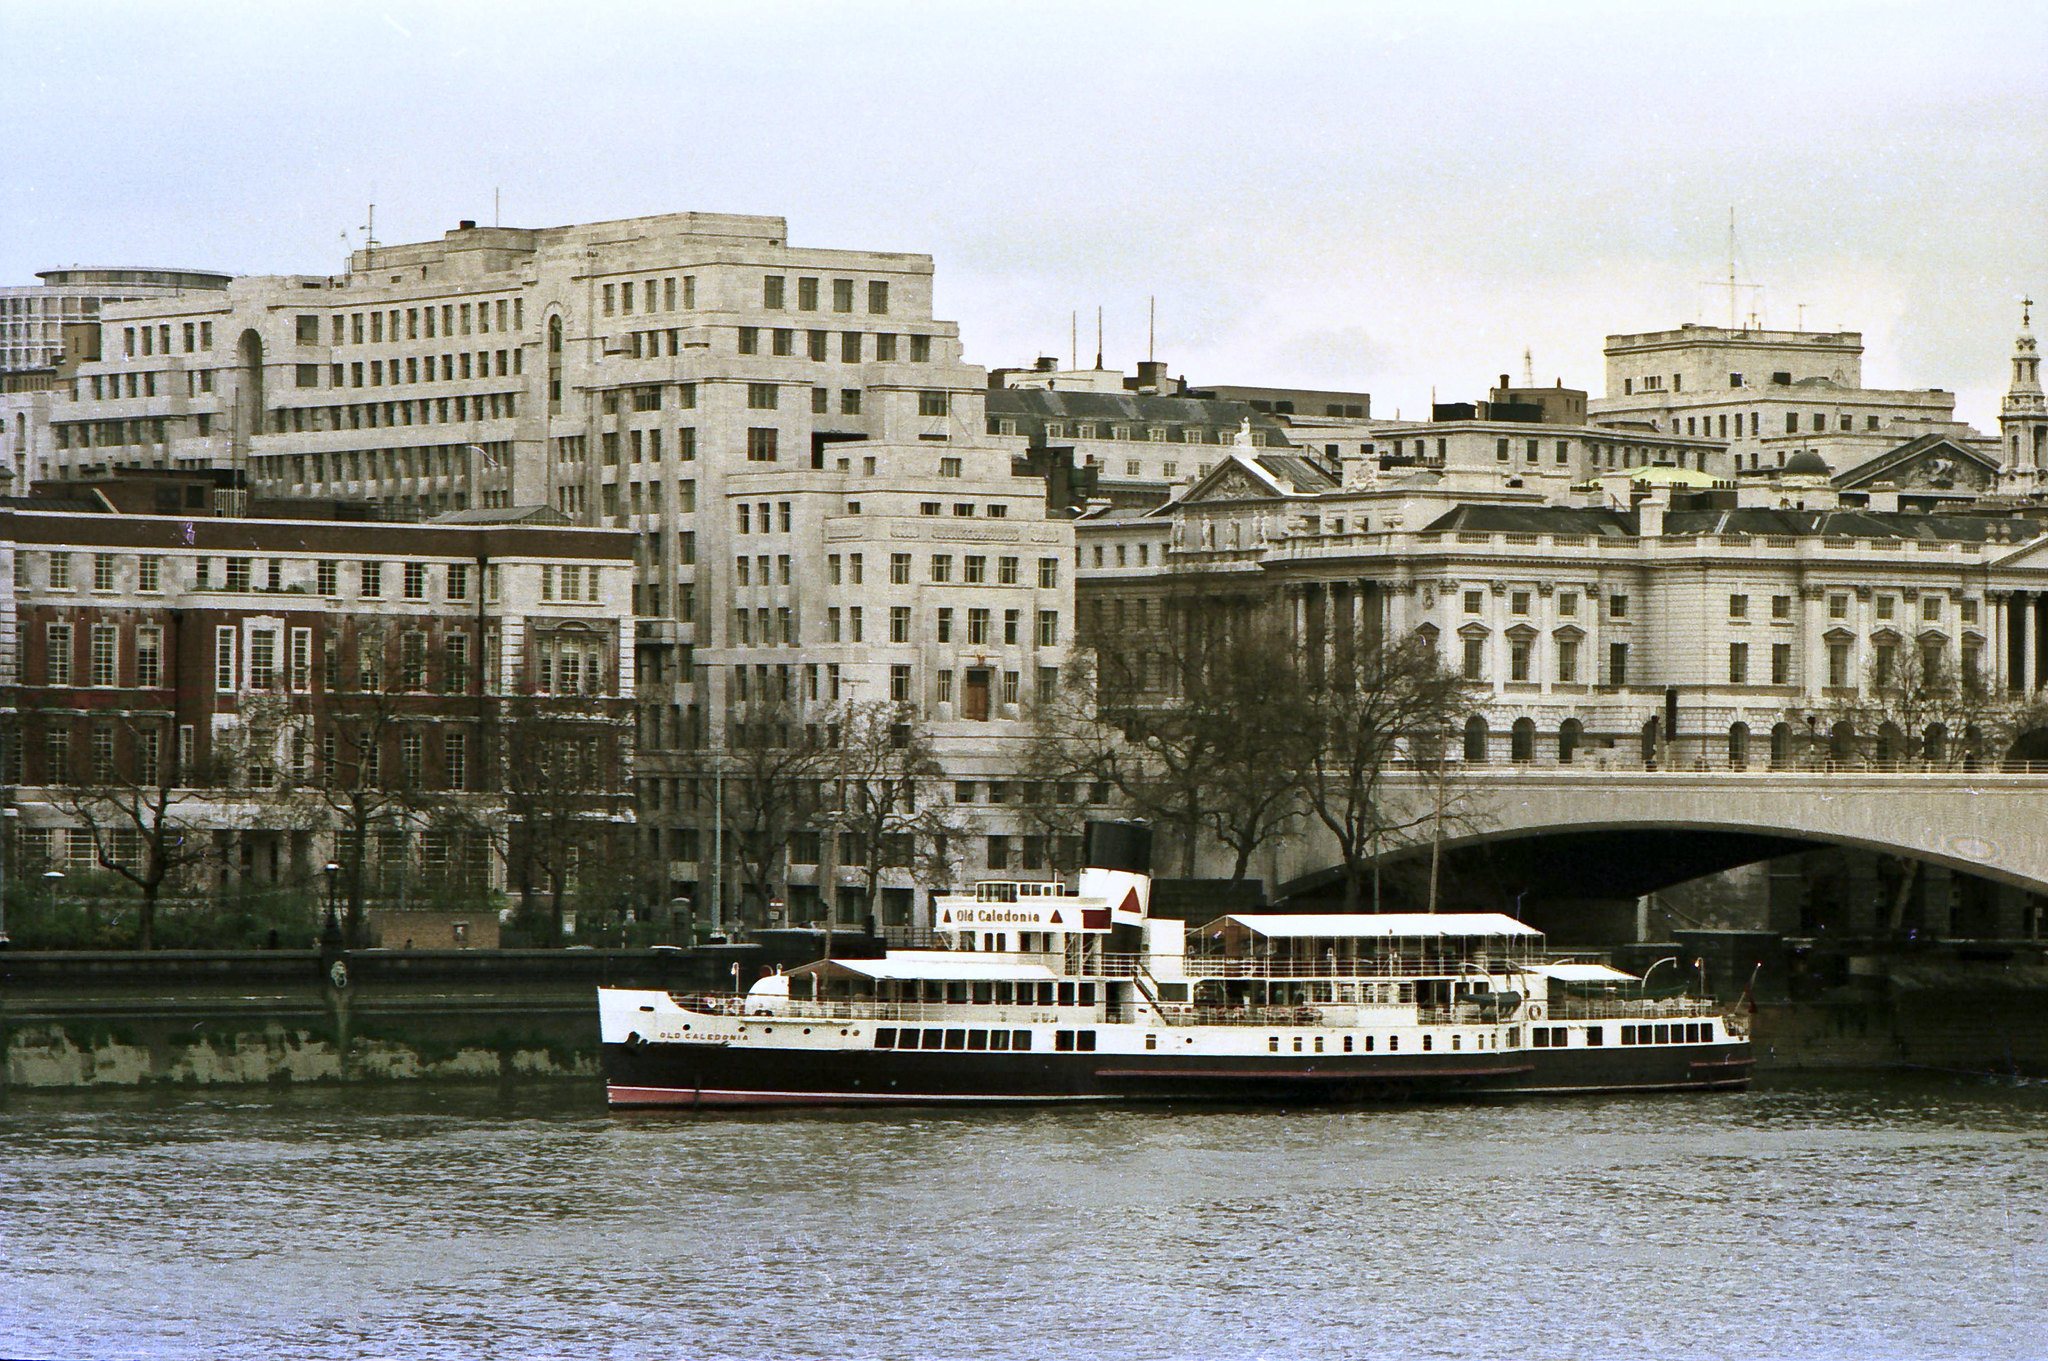 Paddle steamer, Old Caledonia moored by the Thames Embankment adjacent to Waterloo bridge. 19th April 1975.